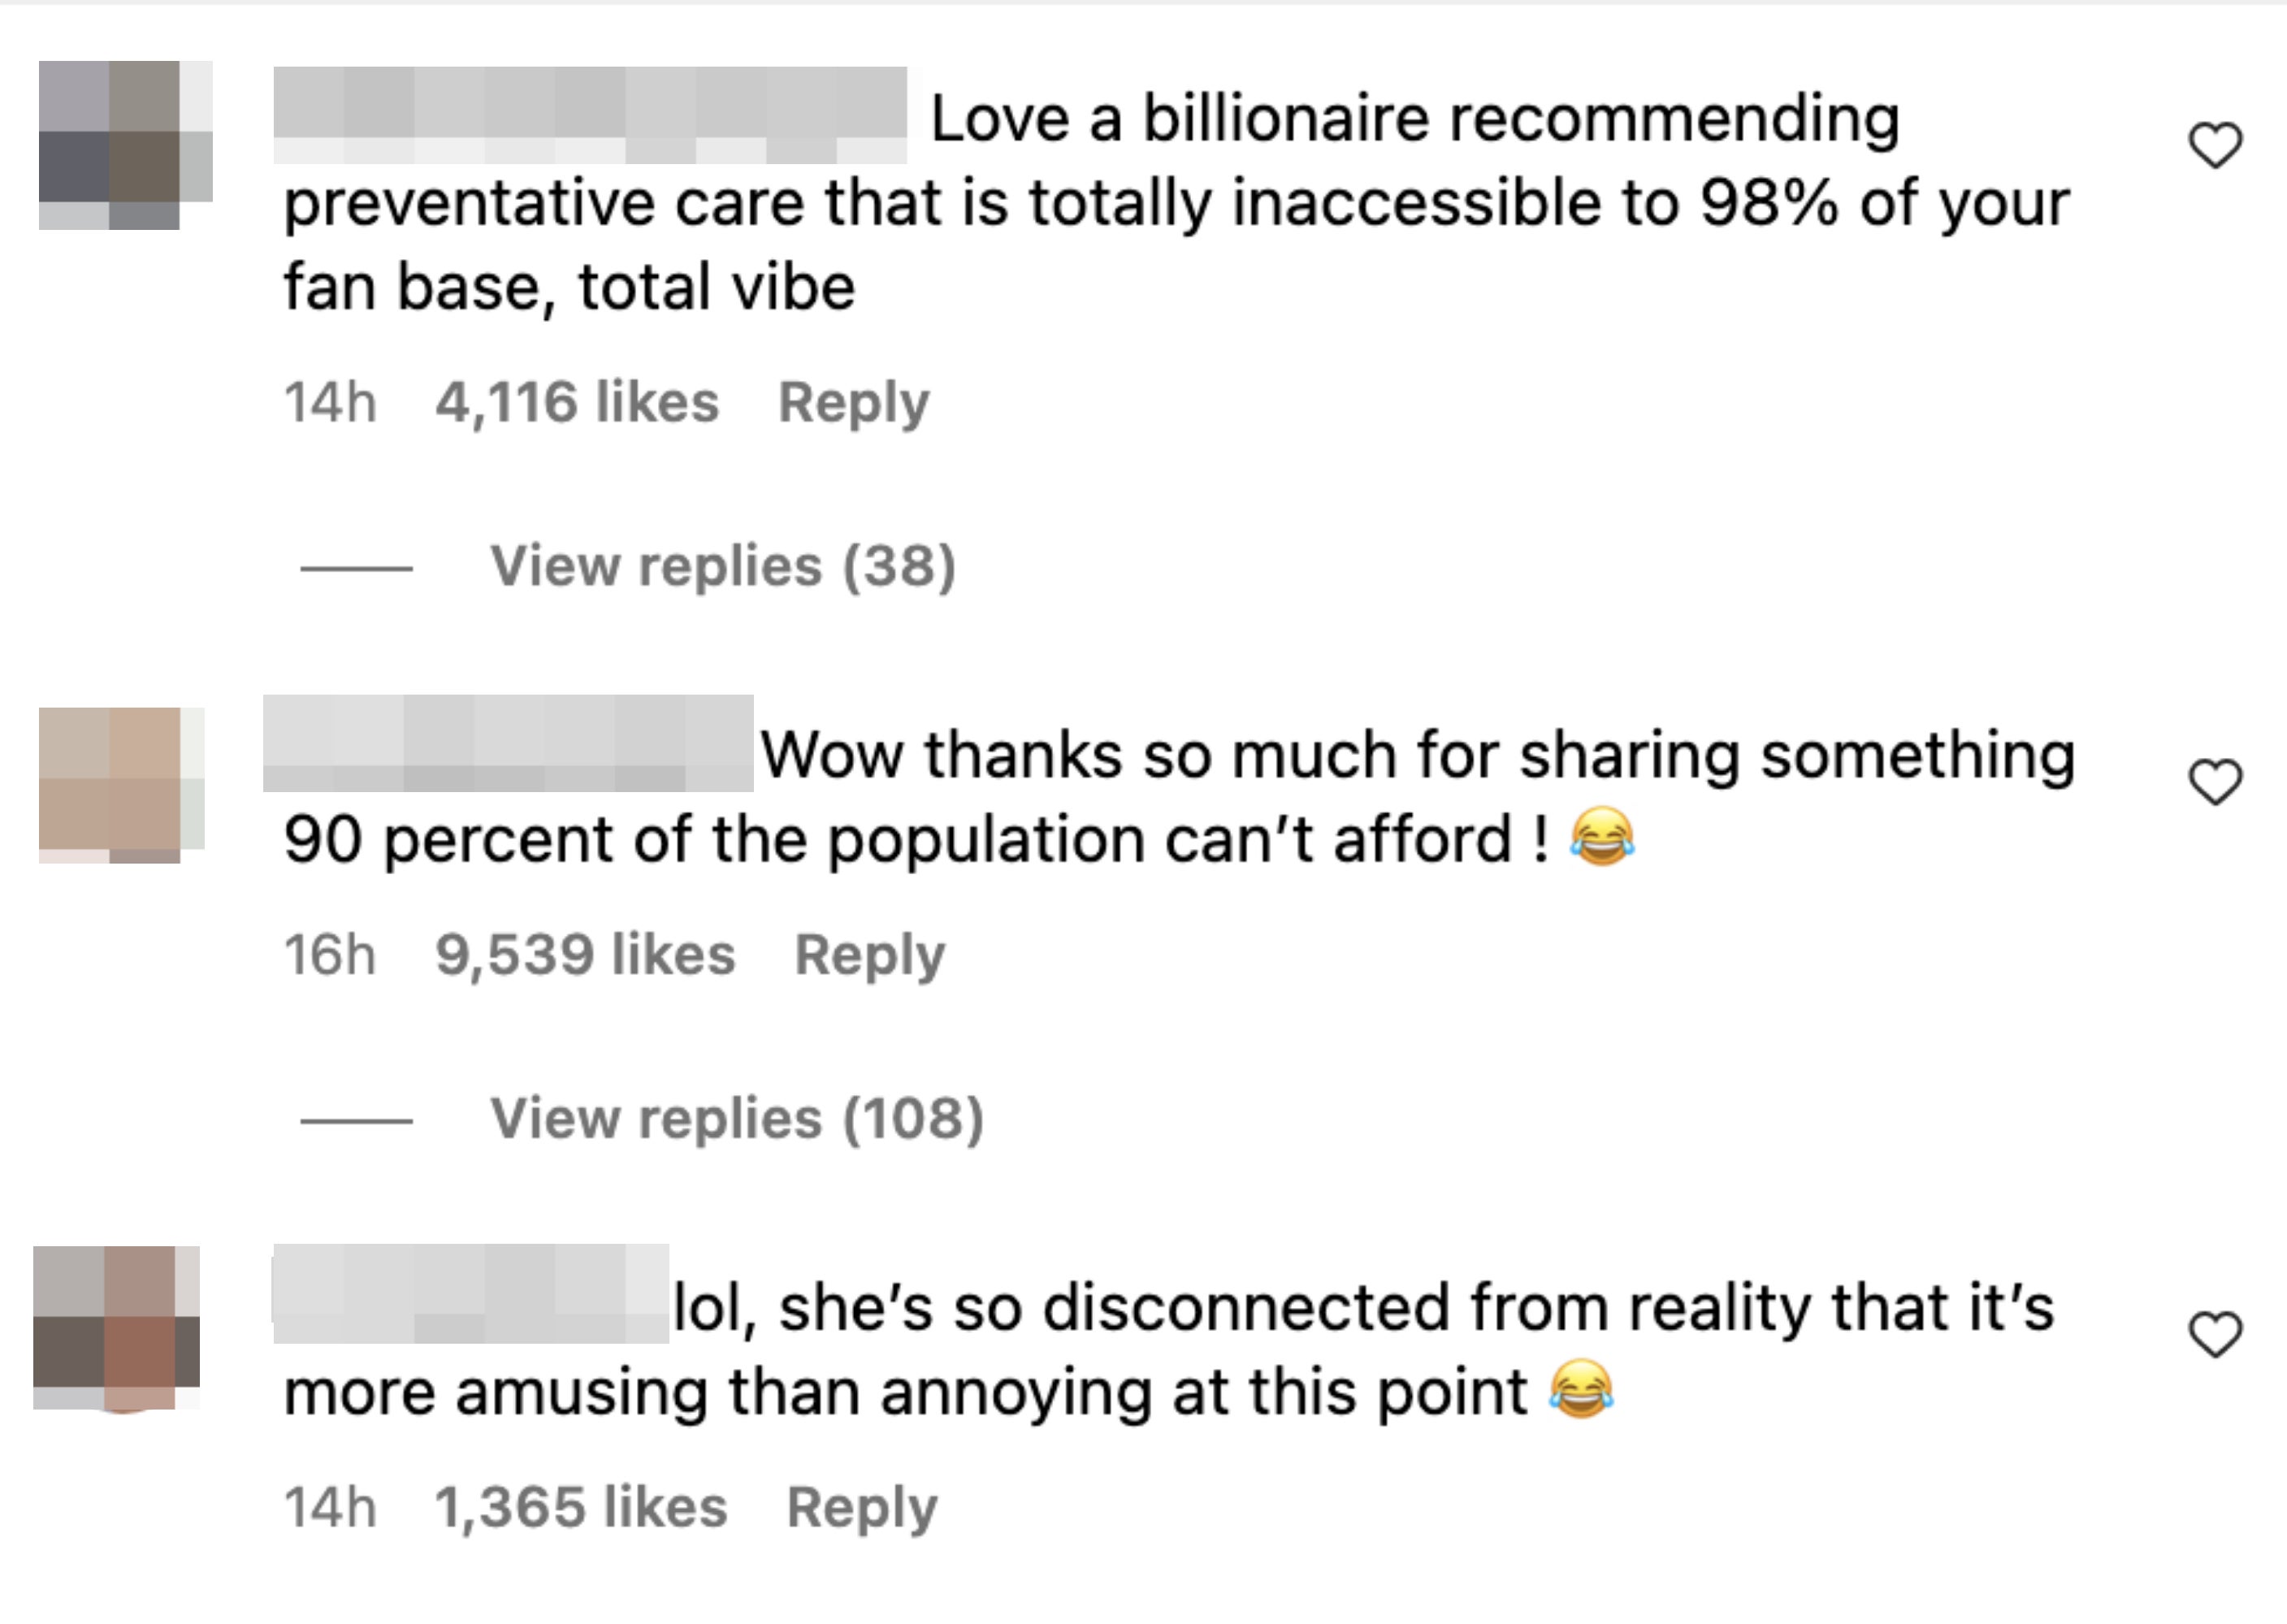 more comments about how the majority of the population can&#x27;t afford this scan and she&#x27;s so disconnected from reality